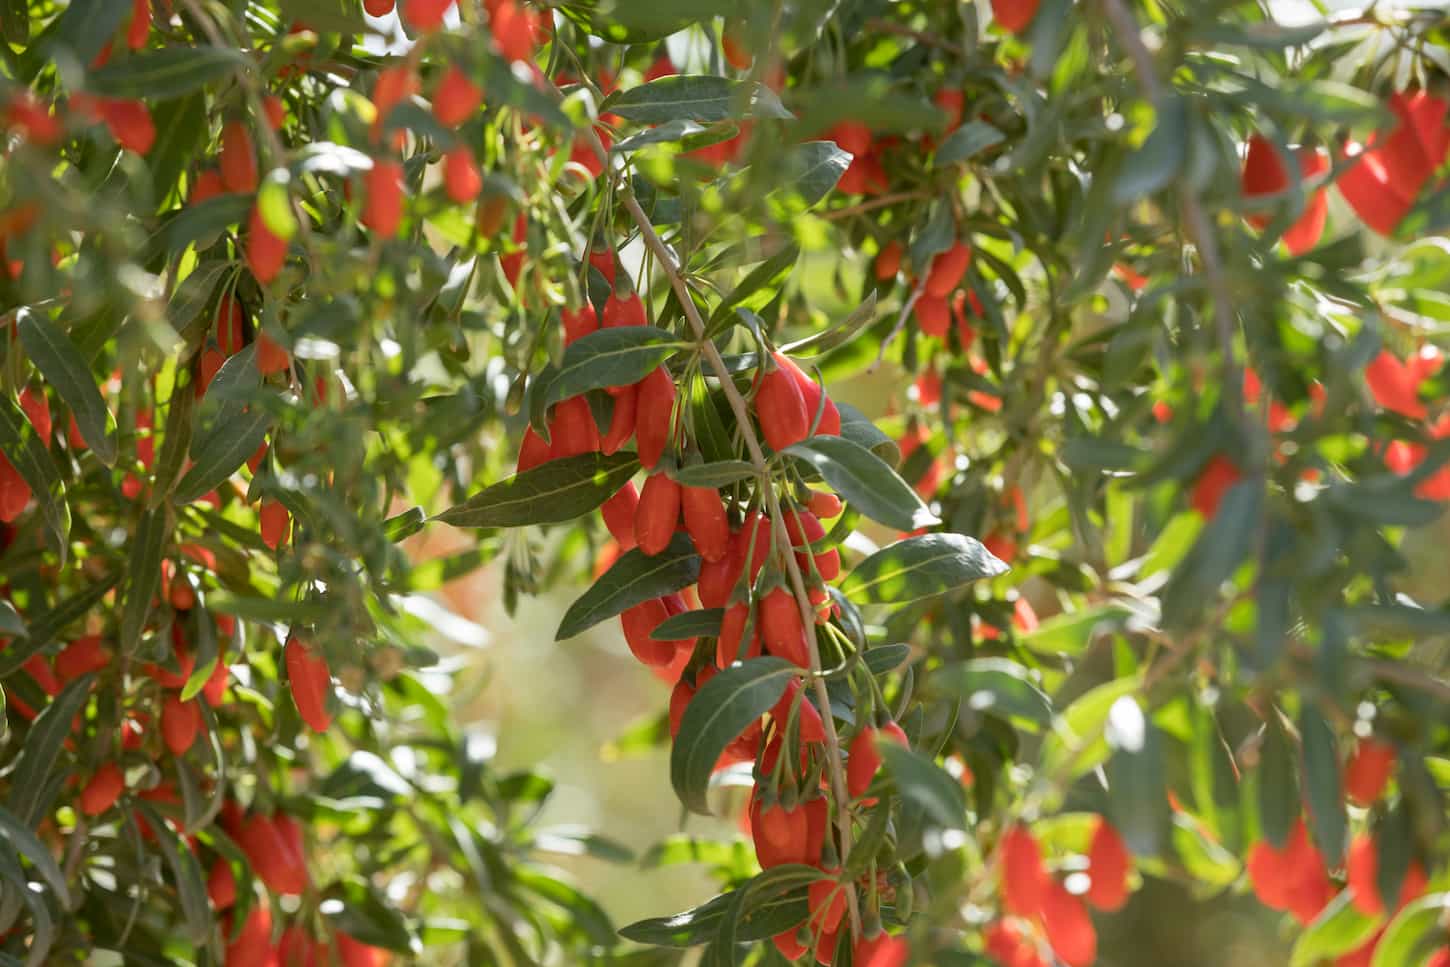 An image of Goji berry fruits and plants in a garden in a broad daylight.